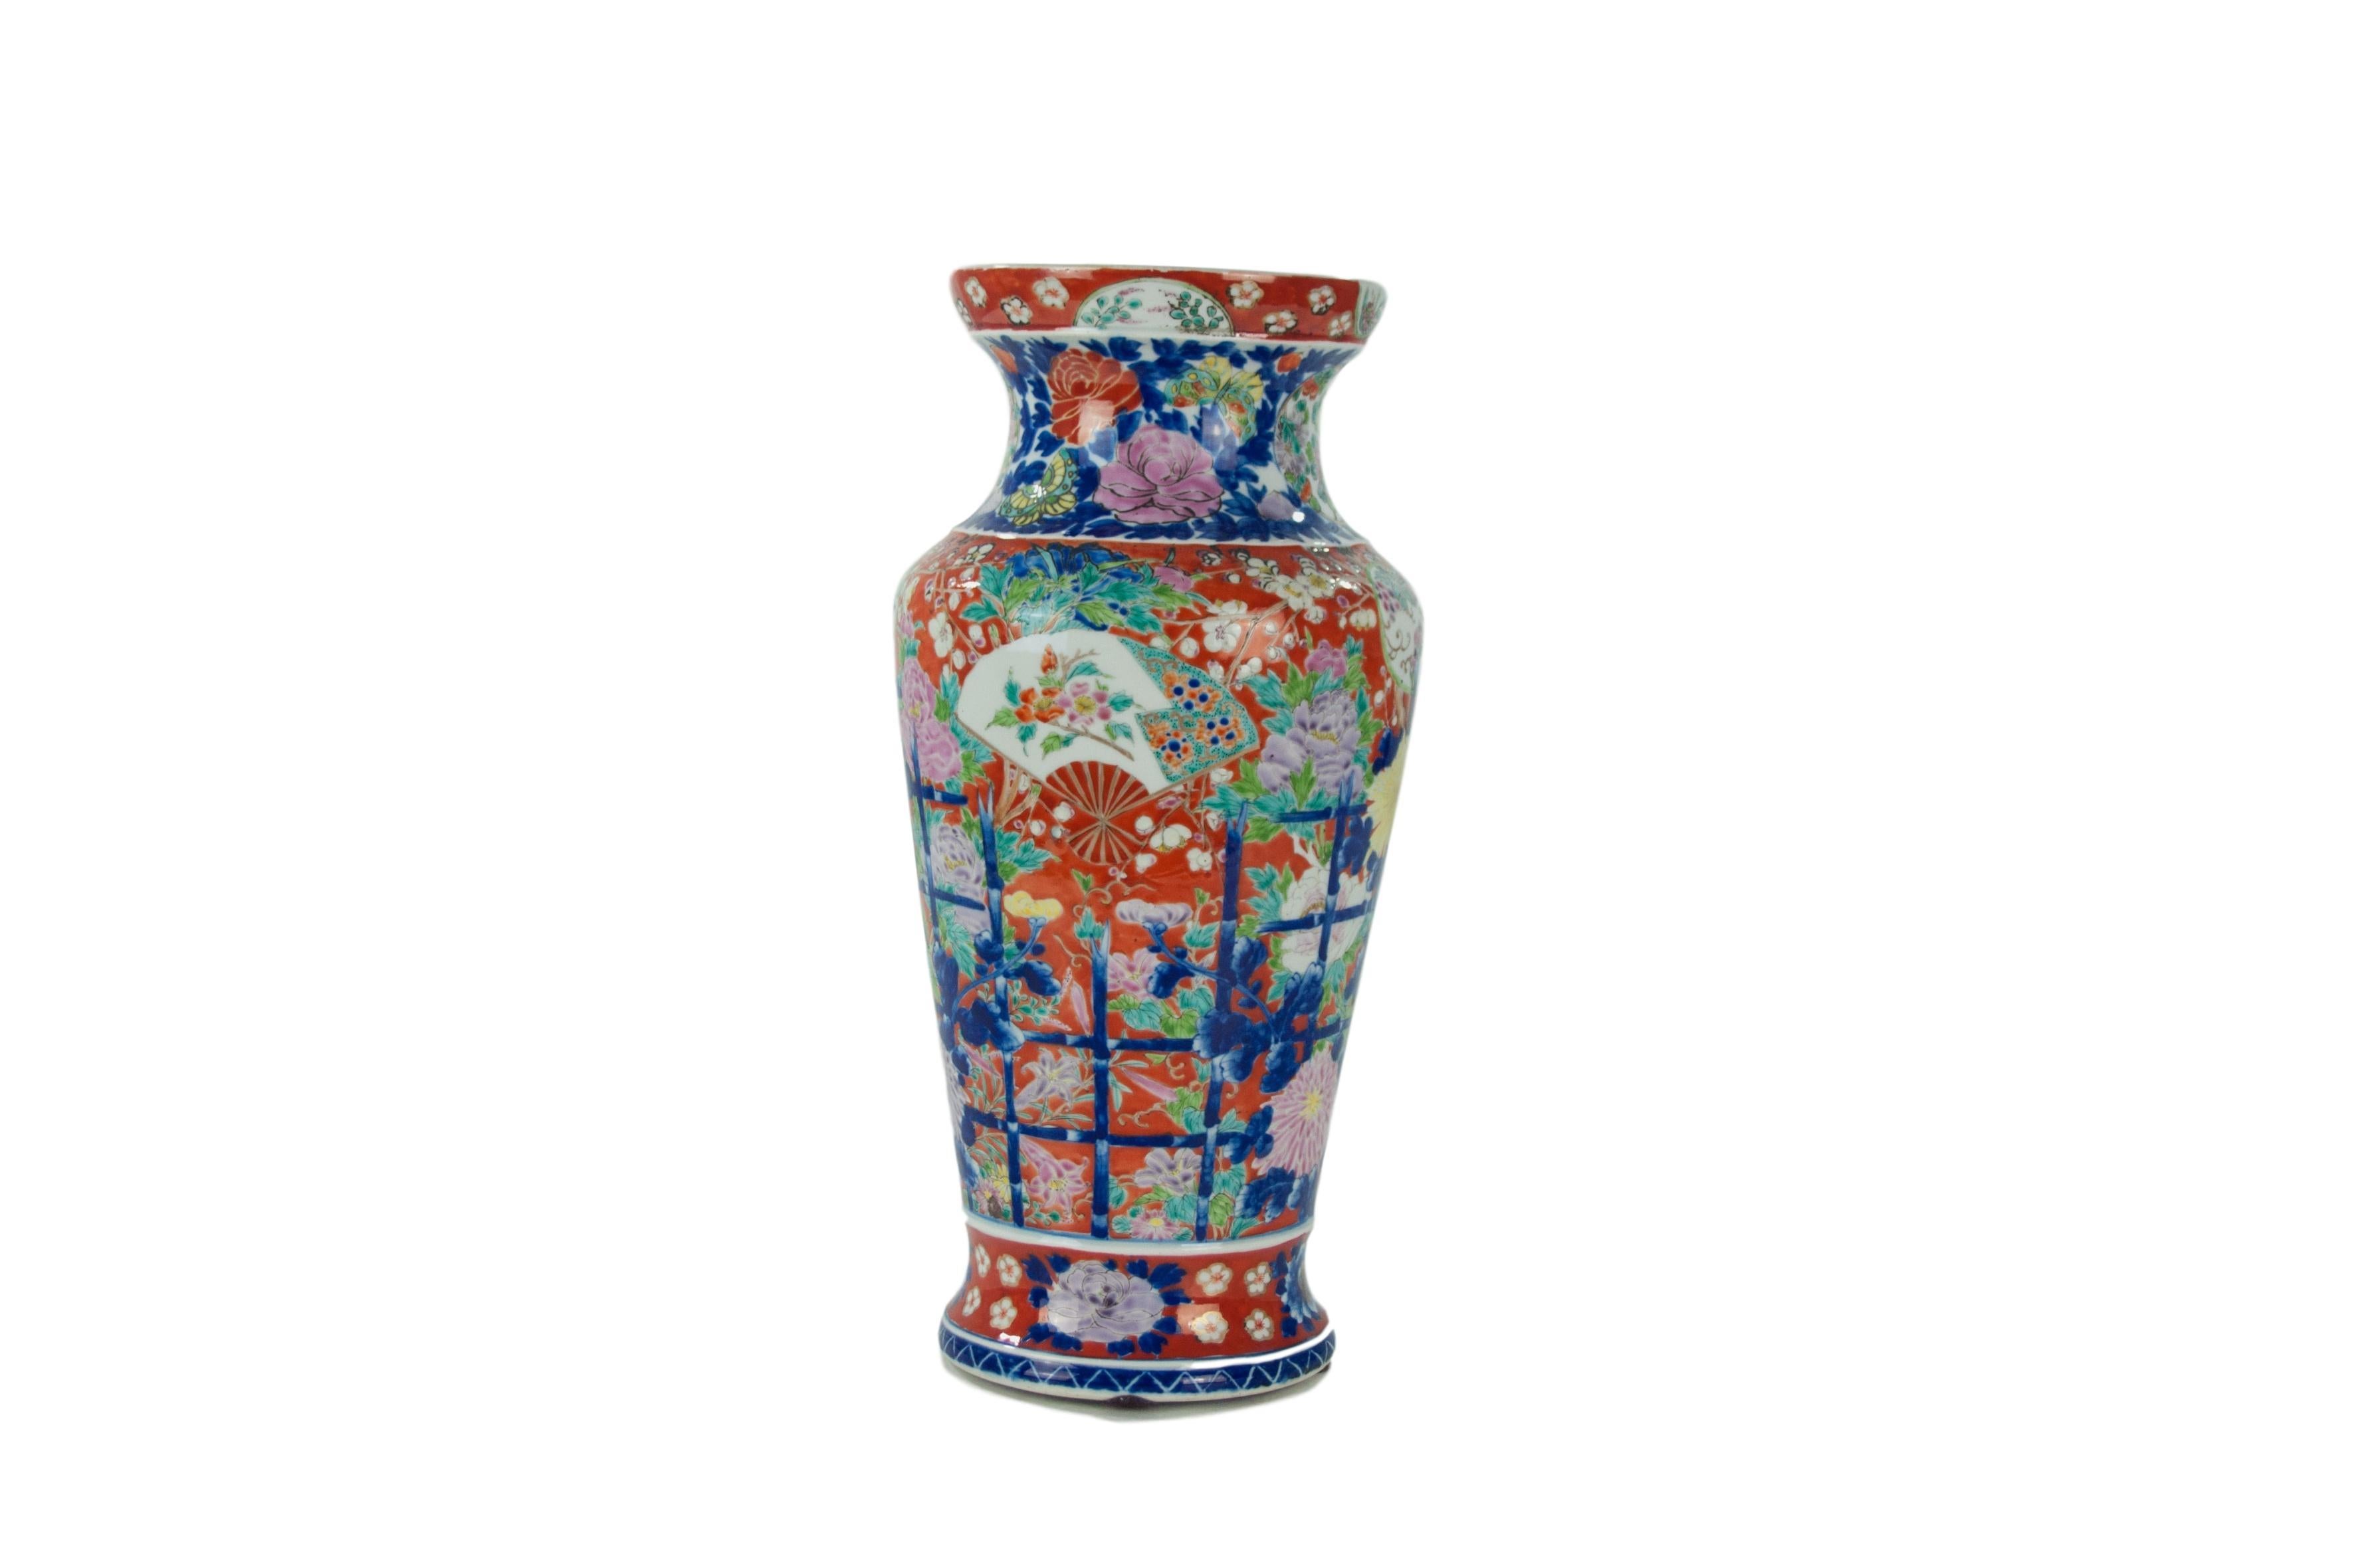 Large late 19th century Chinese Export Porcelain Imari and Famille Rose hand painted vase.  Extremely rare coloration.  